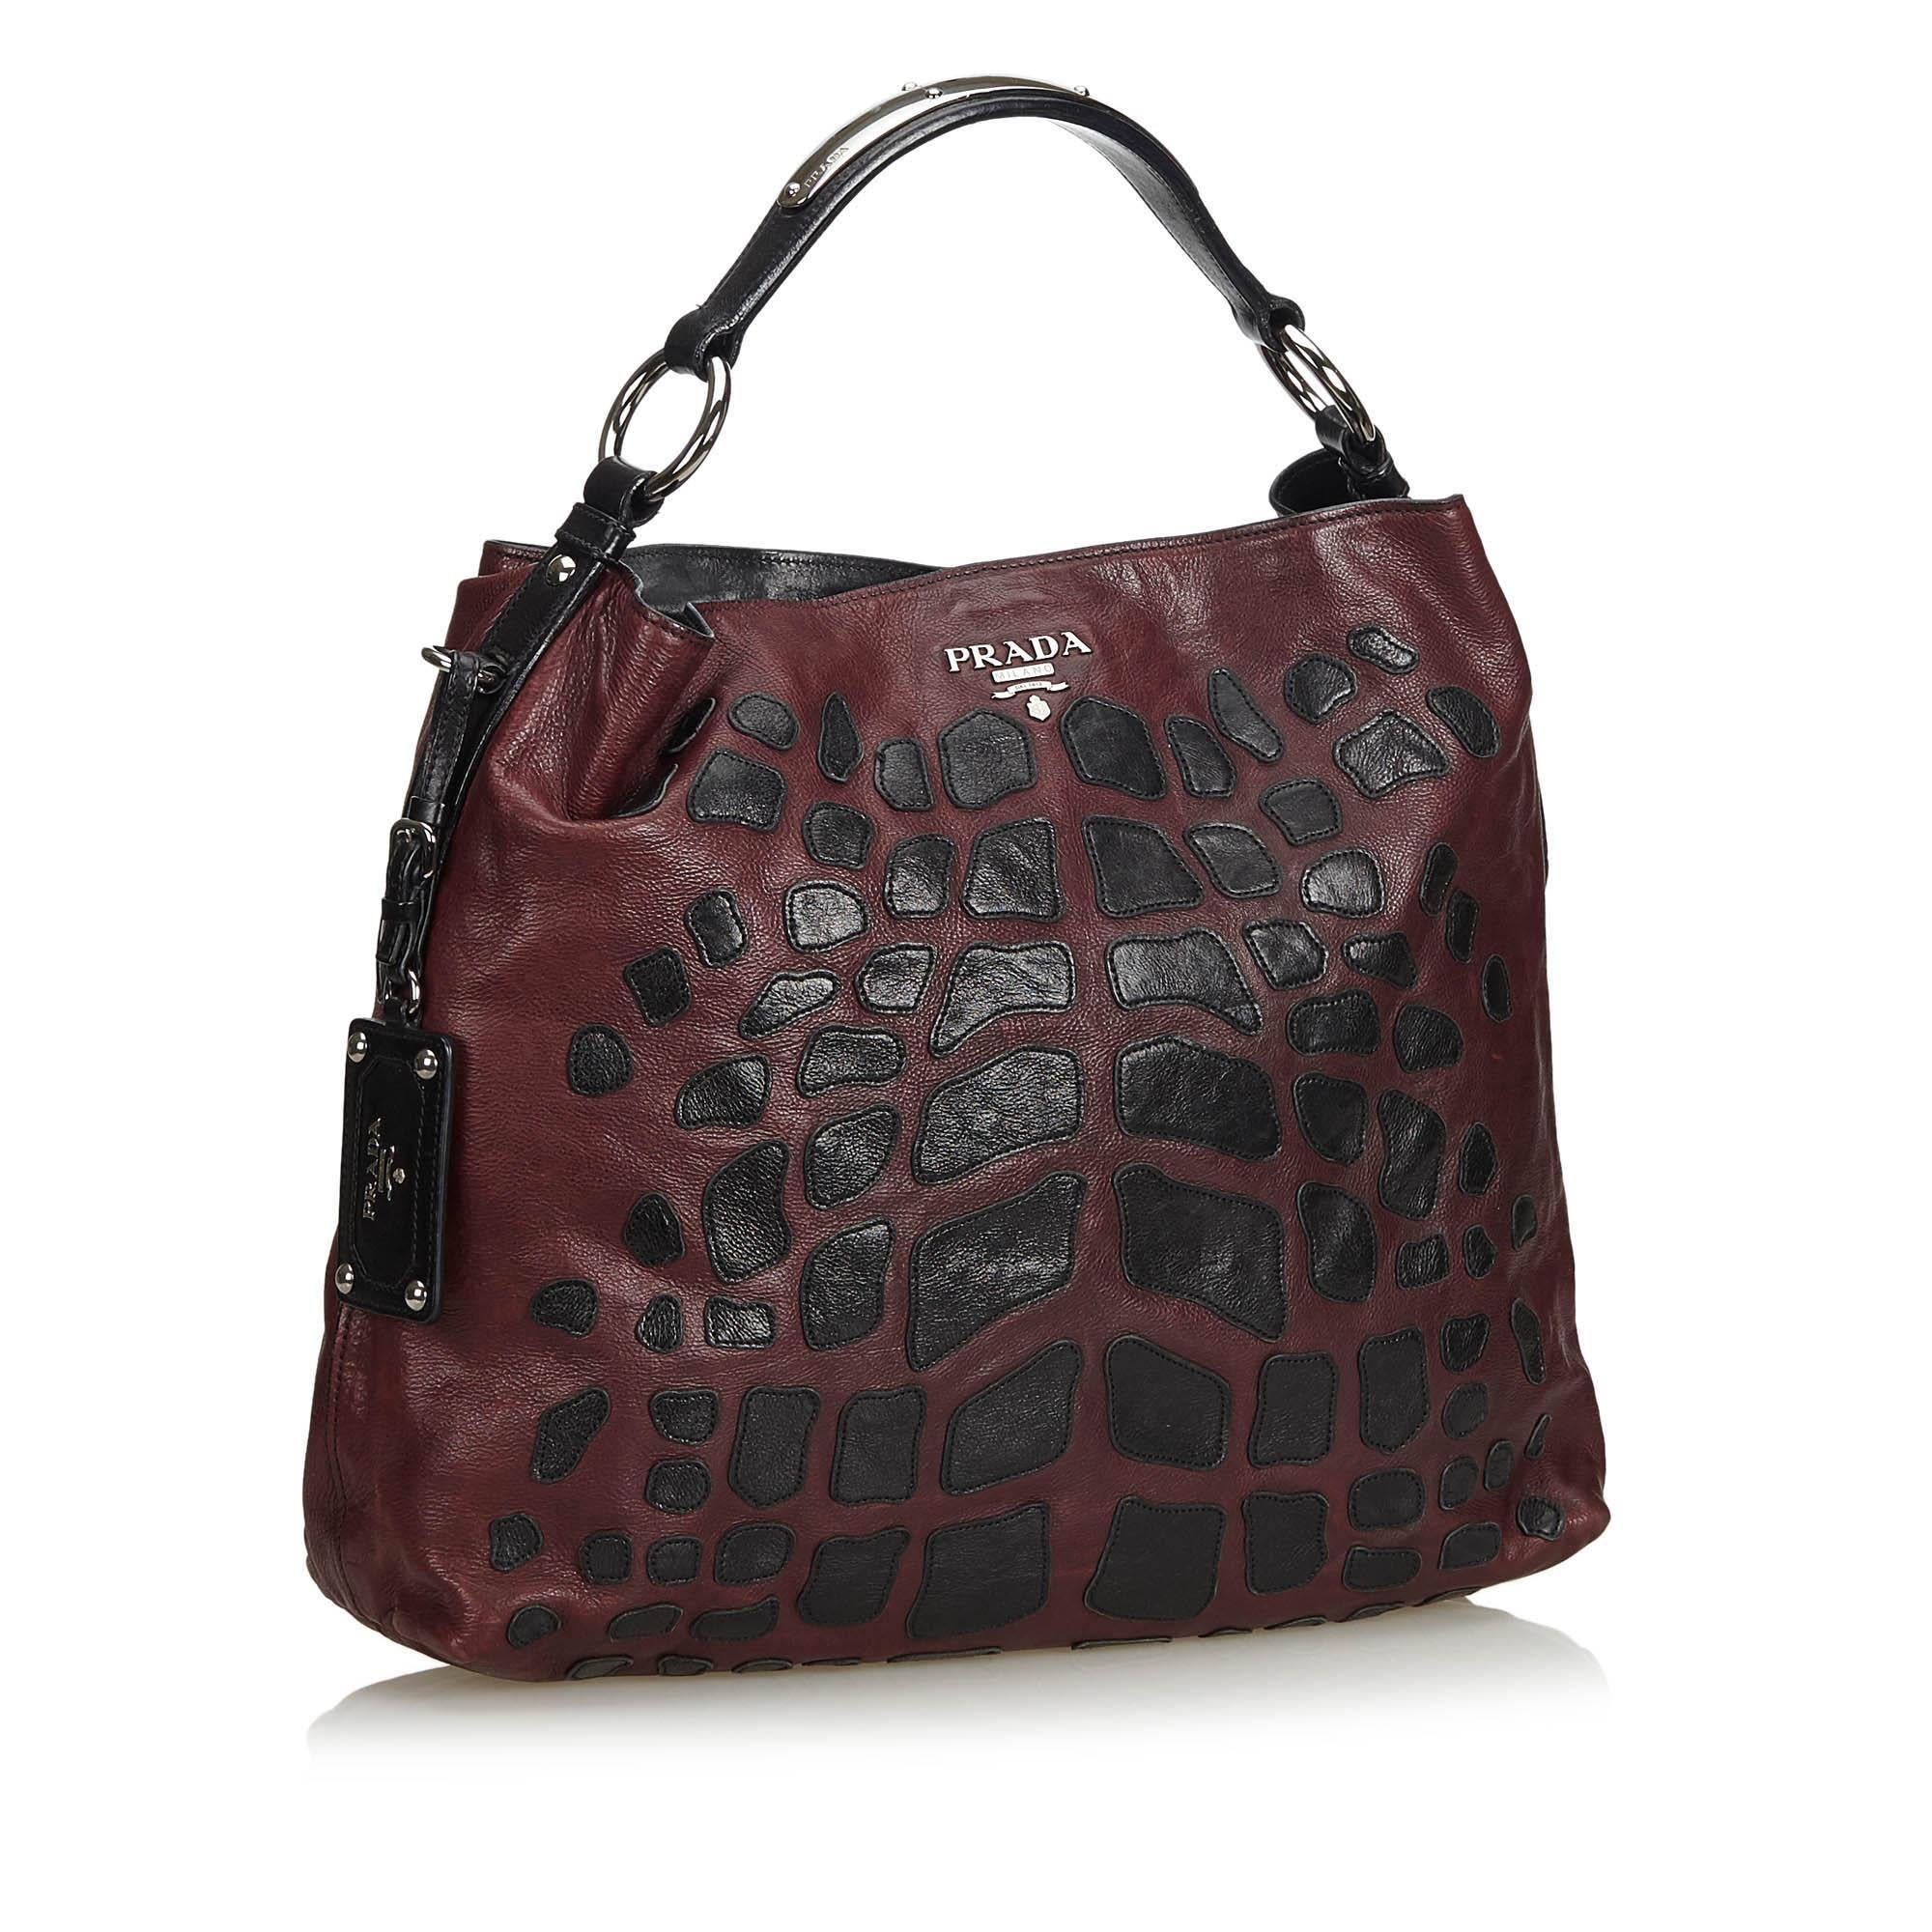 This tote features Nappa leather, flat shoulder straps, patchwork detailing, an open top with a magnetic closure, nylon lining, and interior slip and zip pockets. It carries as B condition rating.

Inclusions: 
This item does not come with